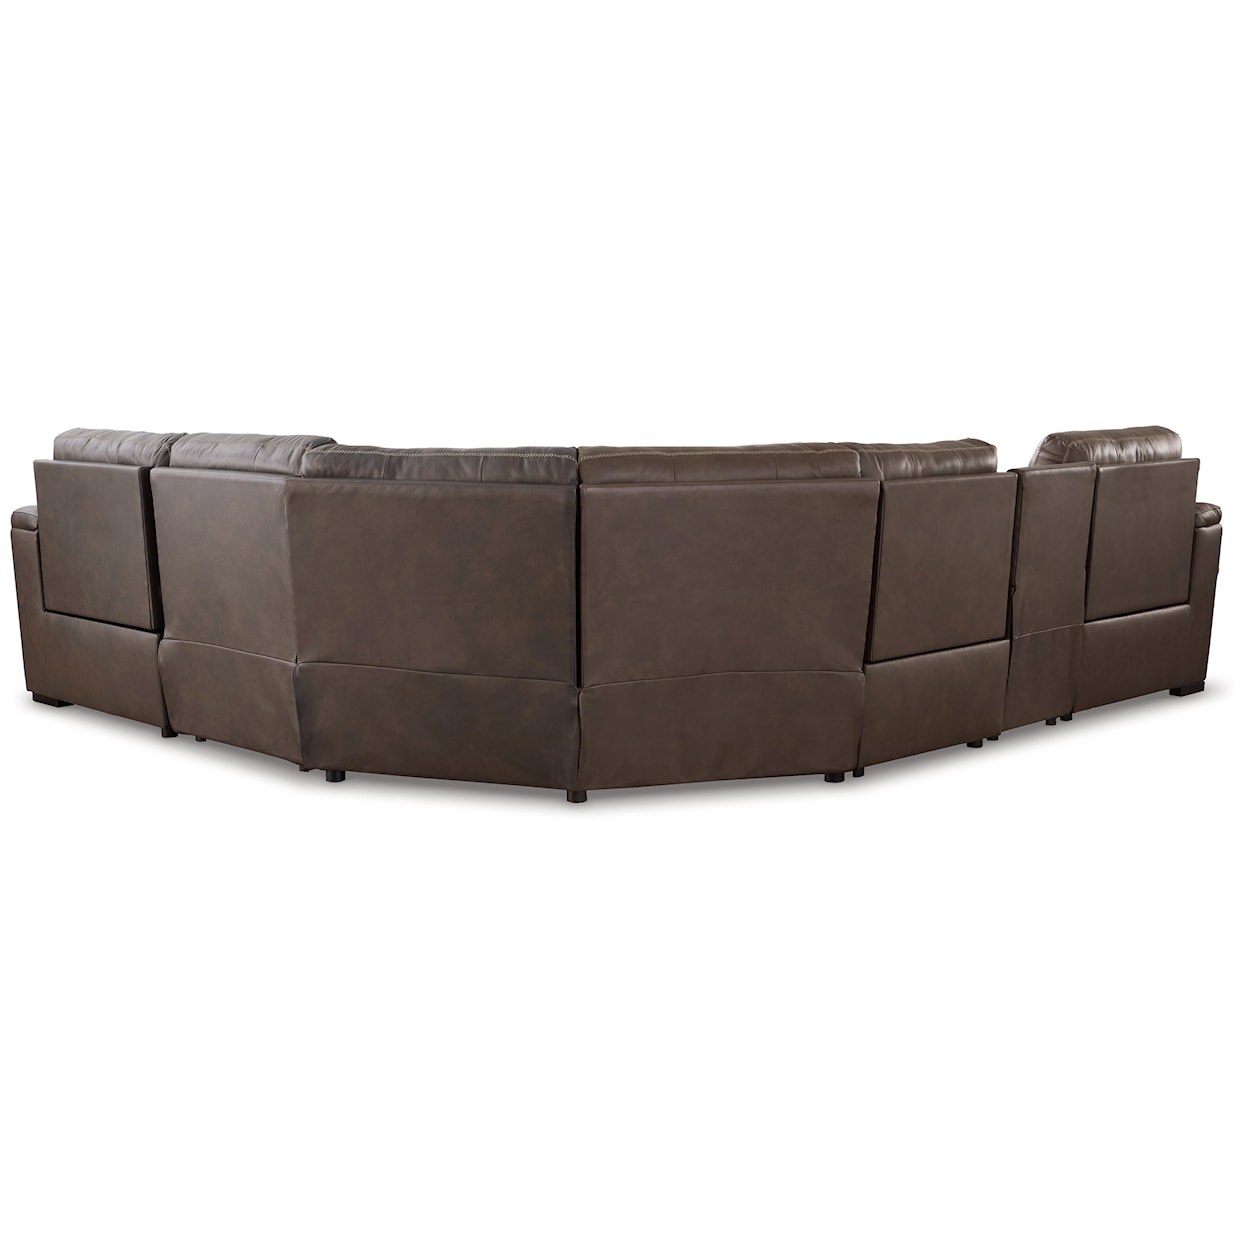 Signature Design by Ashley Furniture Salvatore Power Reclining Sectional Sofa